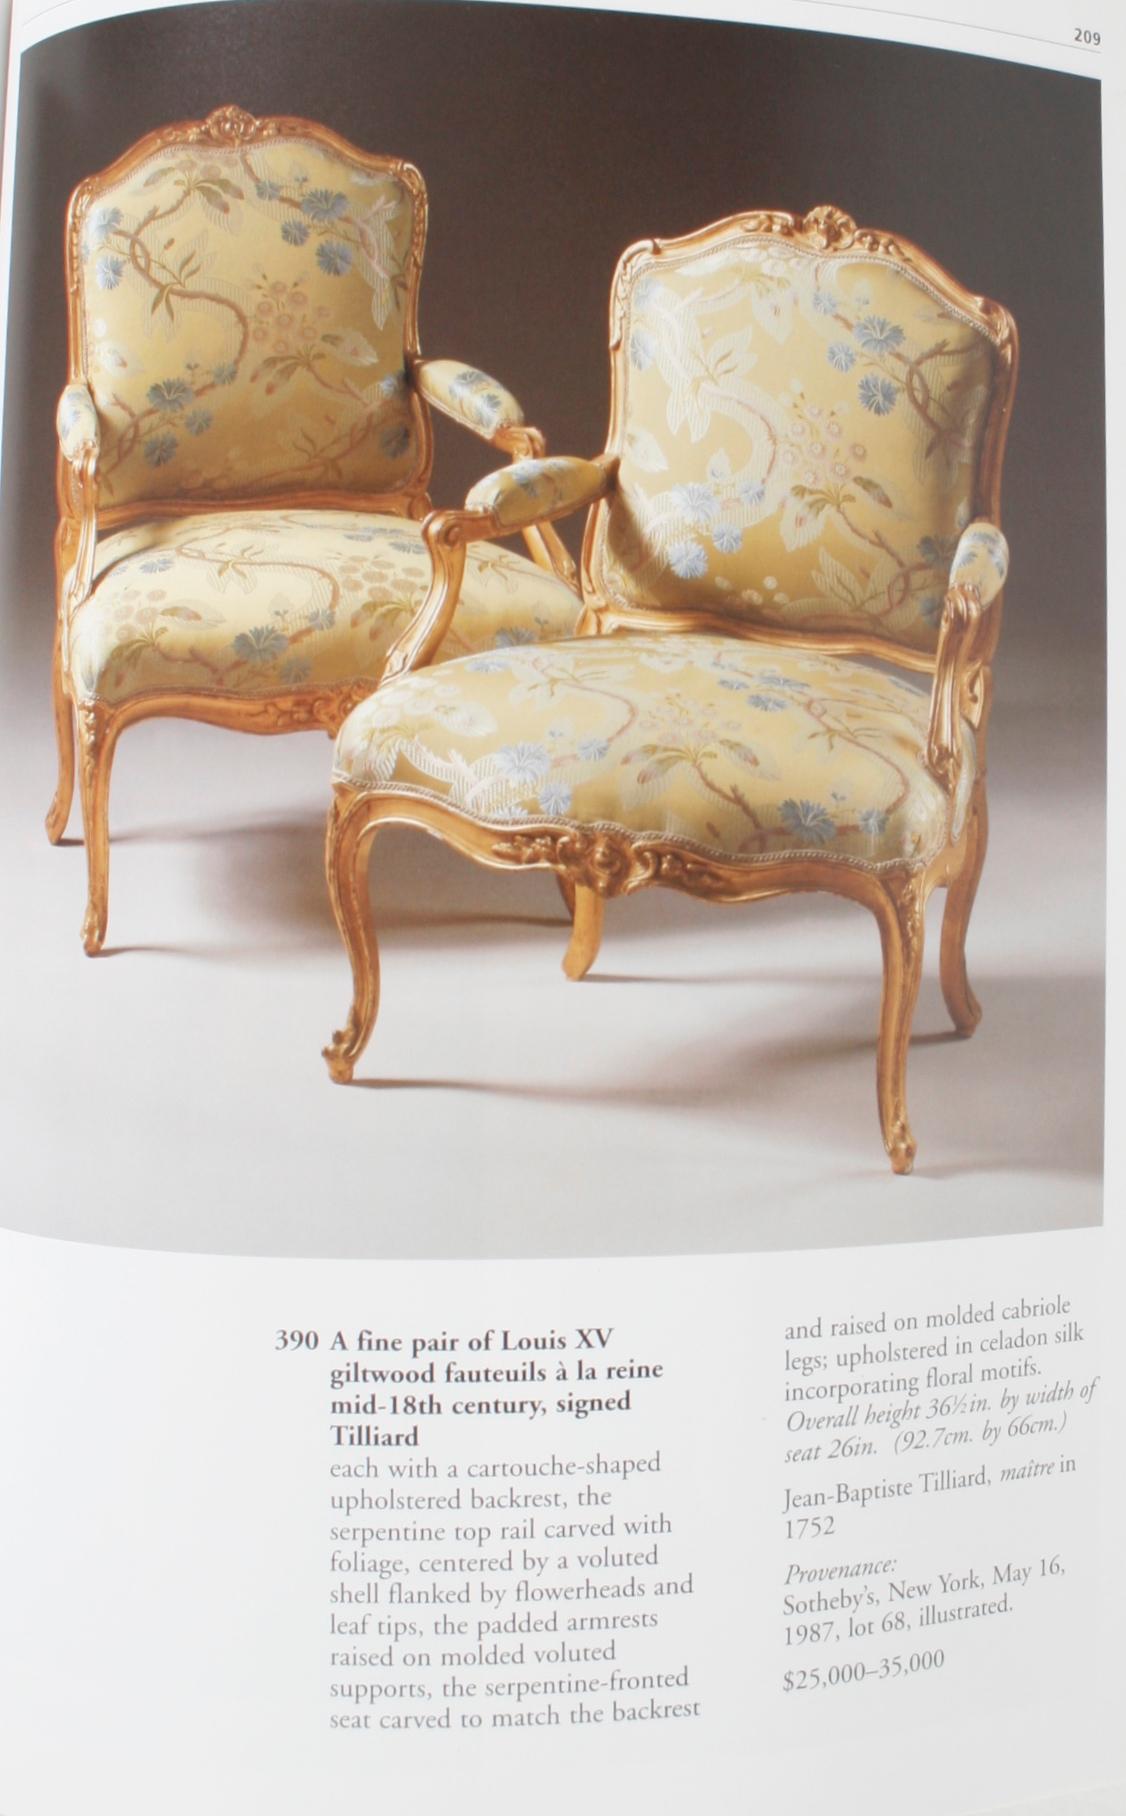 American Sotheby's, Important French and Continental Furniture, Estate Peter A. Paanakker